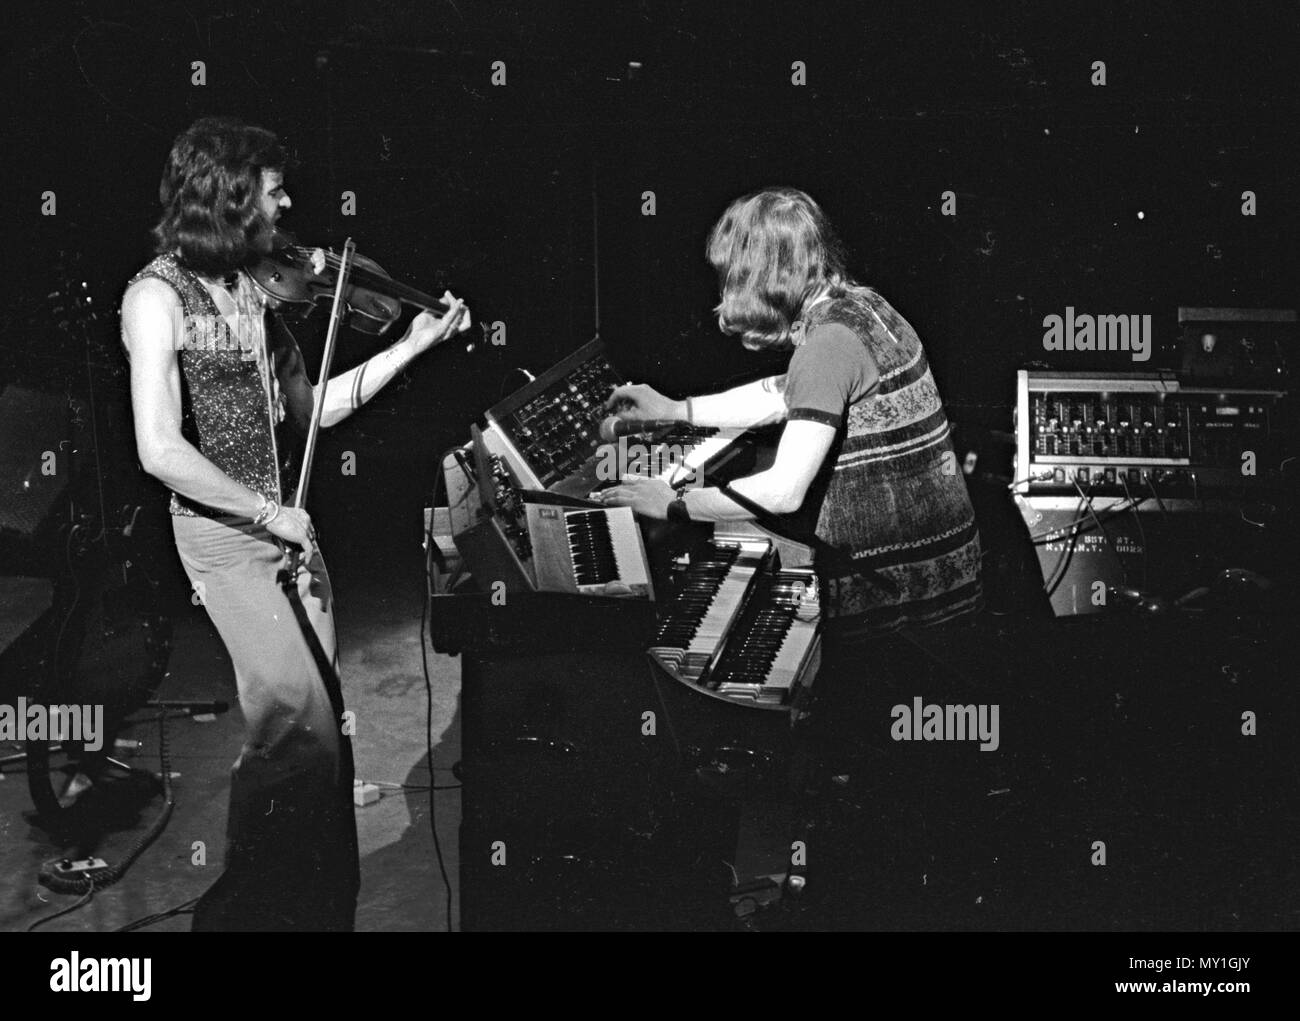 Albums Black and White Stock Photos & Images - Alamy